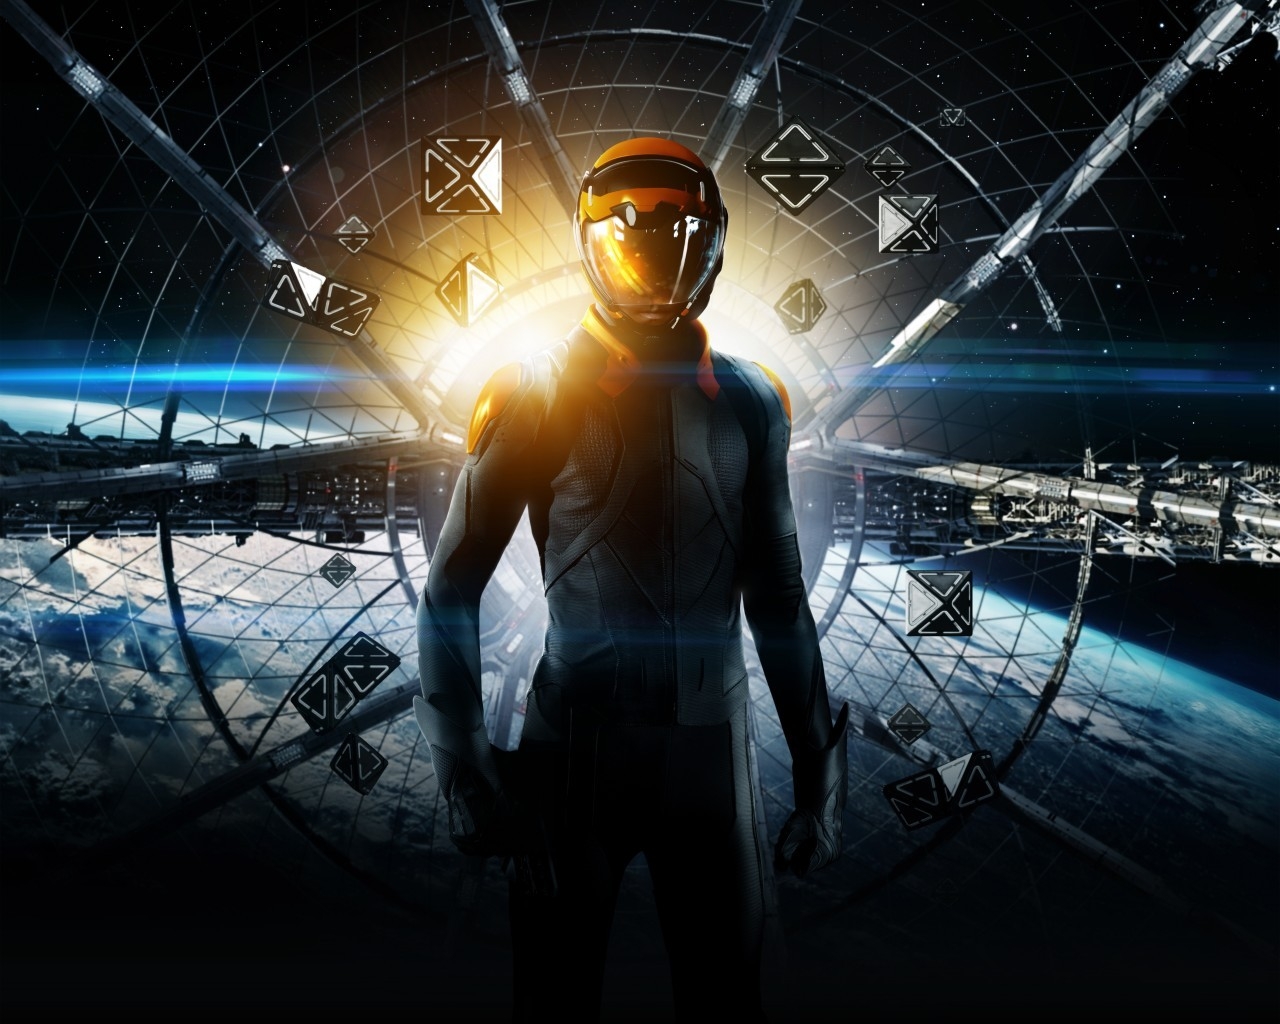 Ender's Game Poster for 1280 x 1024 resolution